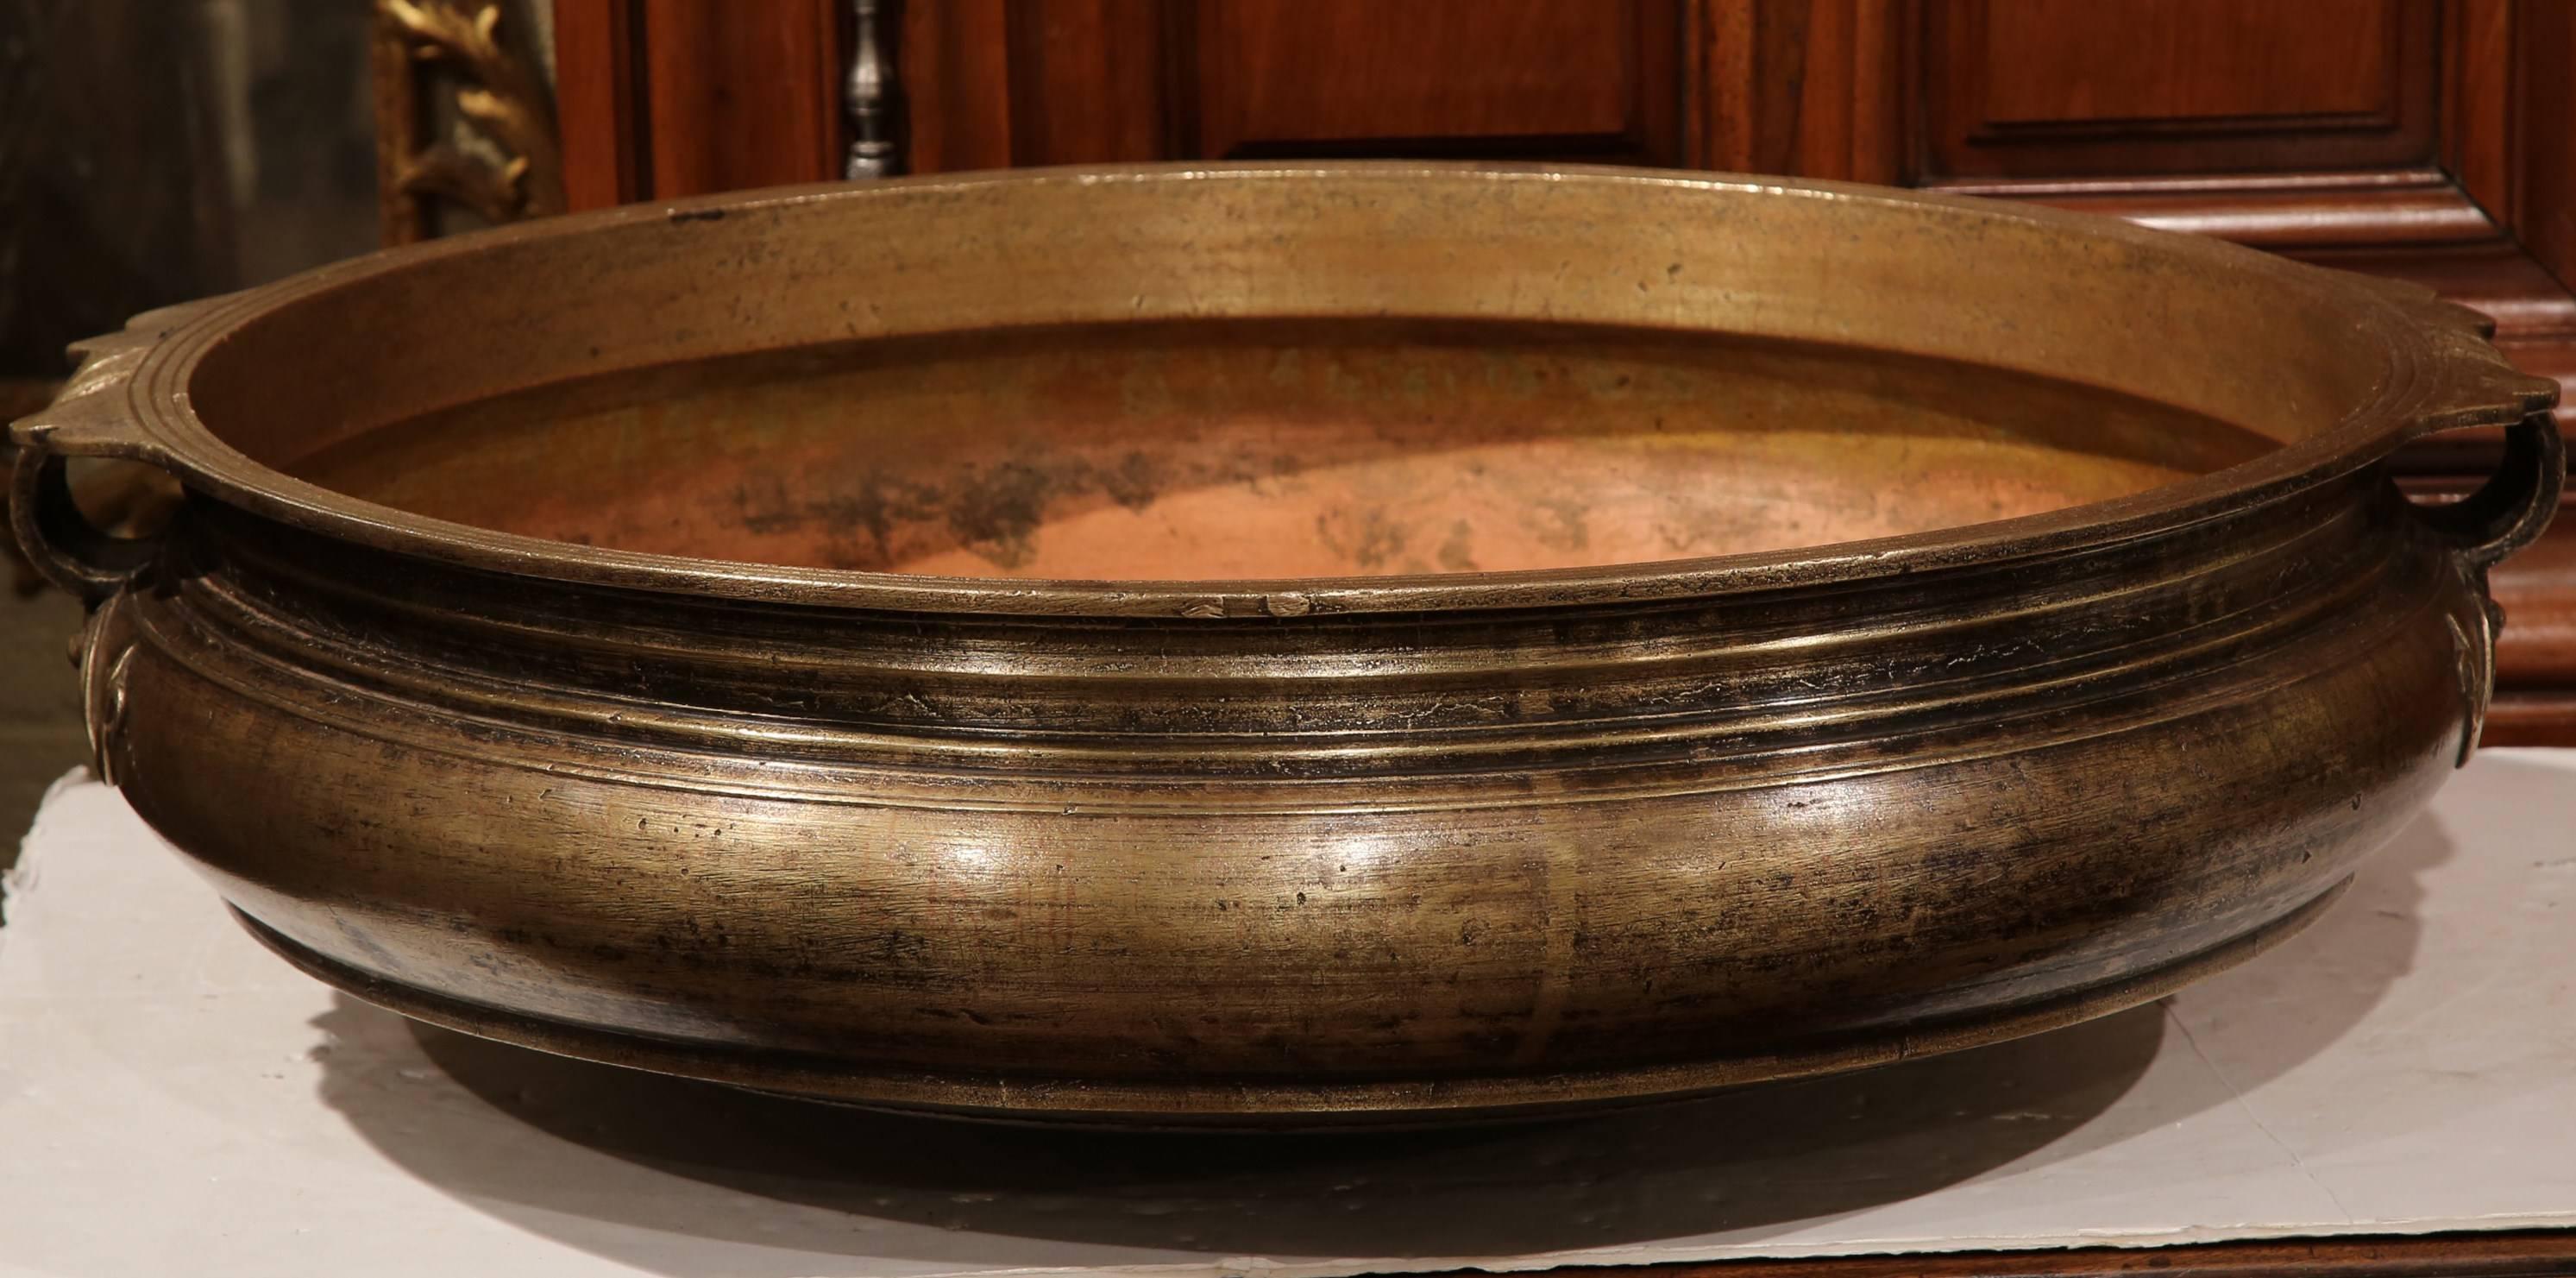 Decorate a table or countertop with this elegant bronze cooking dish. Crafted in Southern India, circa 1860, the antique Urli has a neoclassical shape with wide mouth, short height and handles on both sides and Fleurs de Lys detail. This dish was a